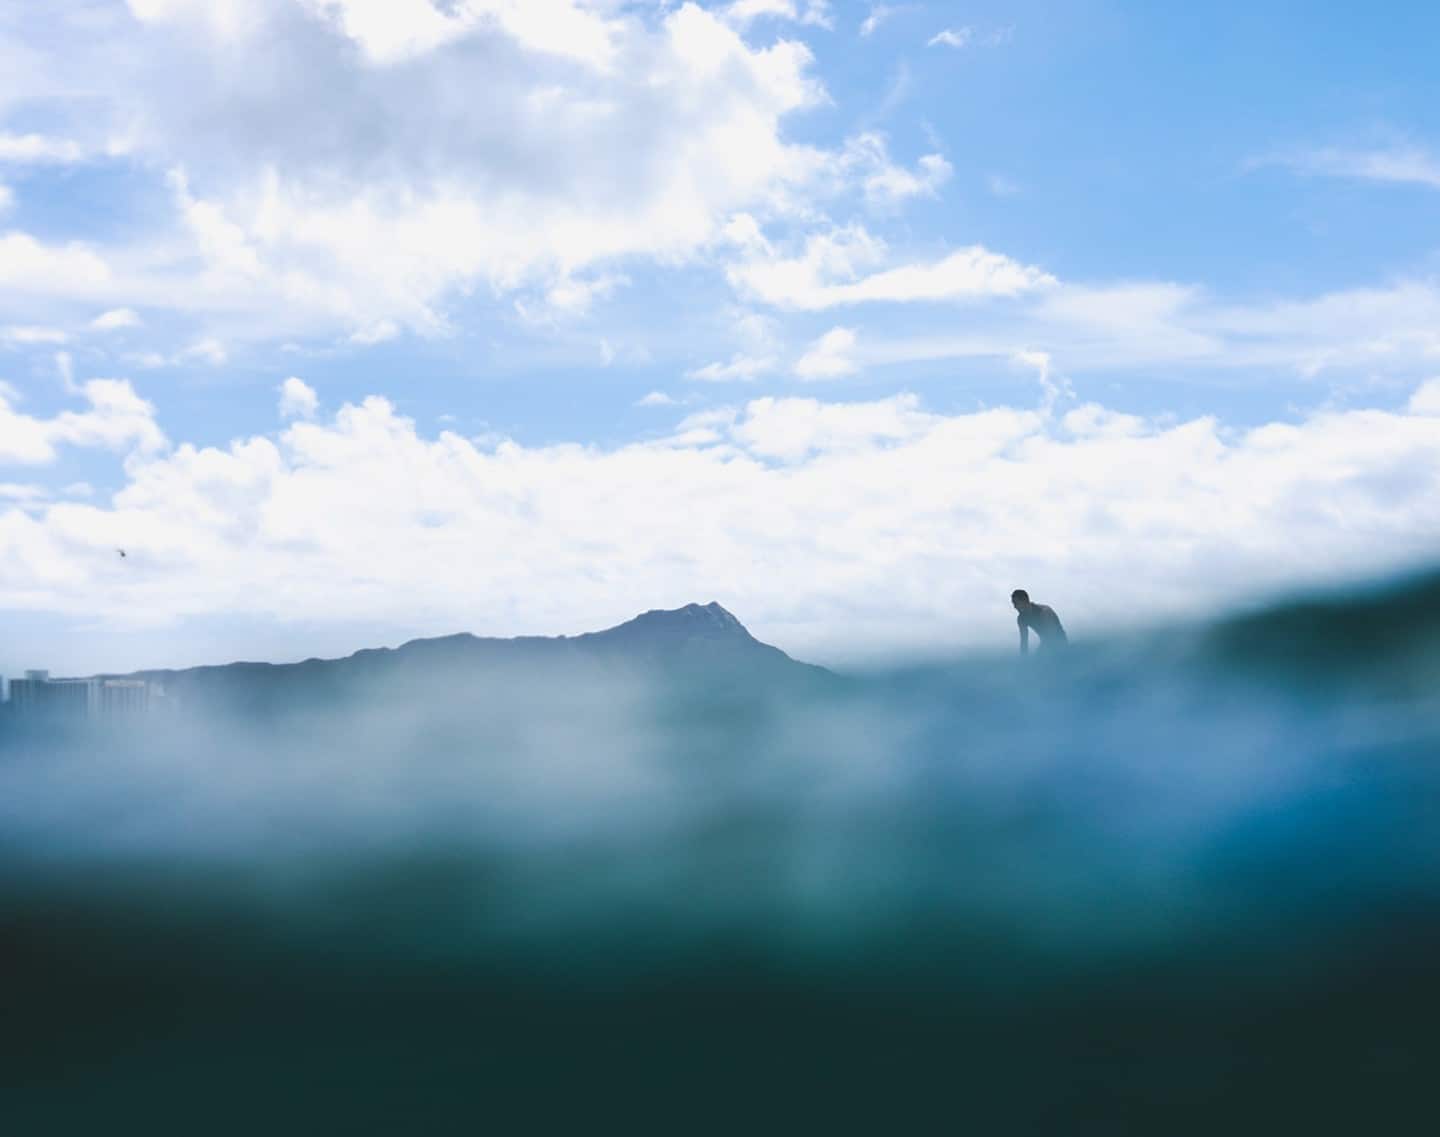 Preview the waves at your favorite break on our South Shore Surf Cam overlooking popular surf spots from Ala Moana Beach Park to Kewalo Basin. Click the link in our bio for a live look.